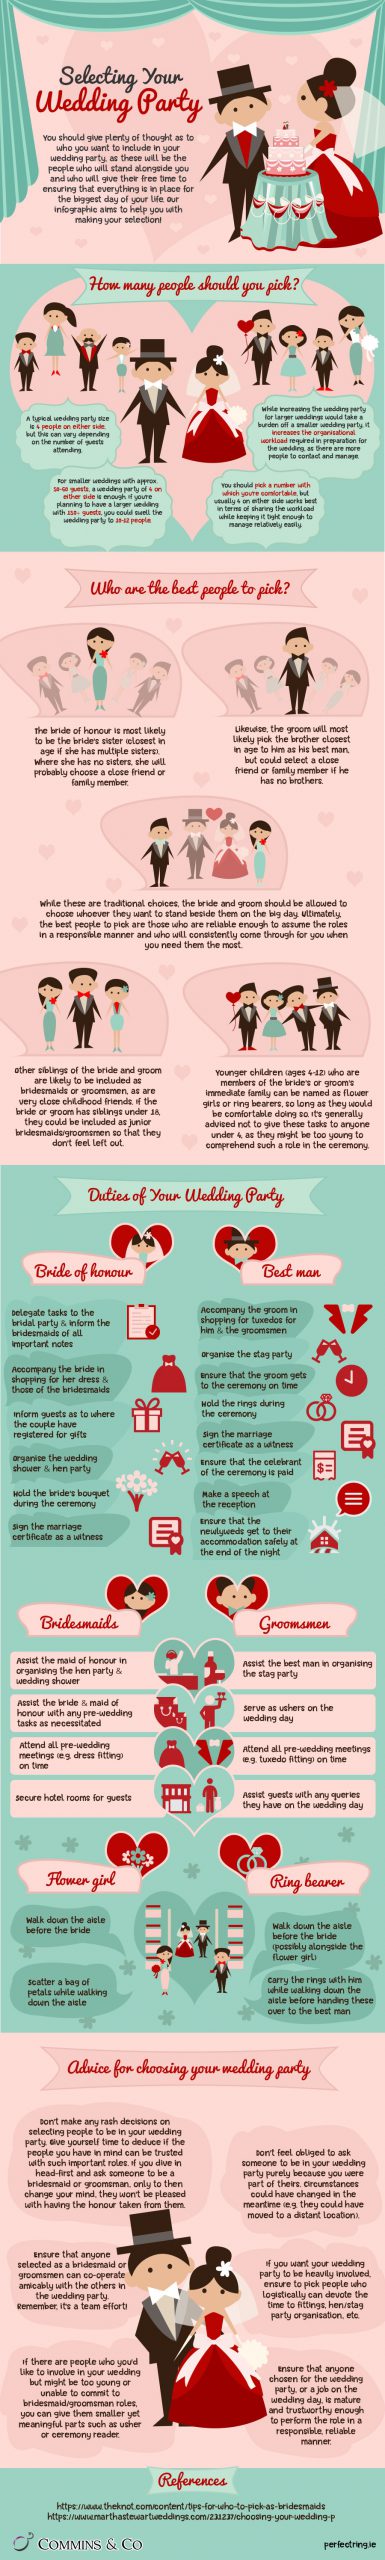 Infographic Tips for Selecting Your Wedding Party